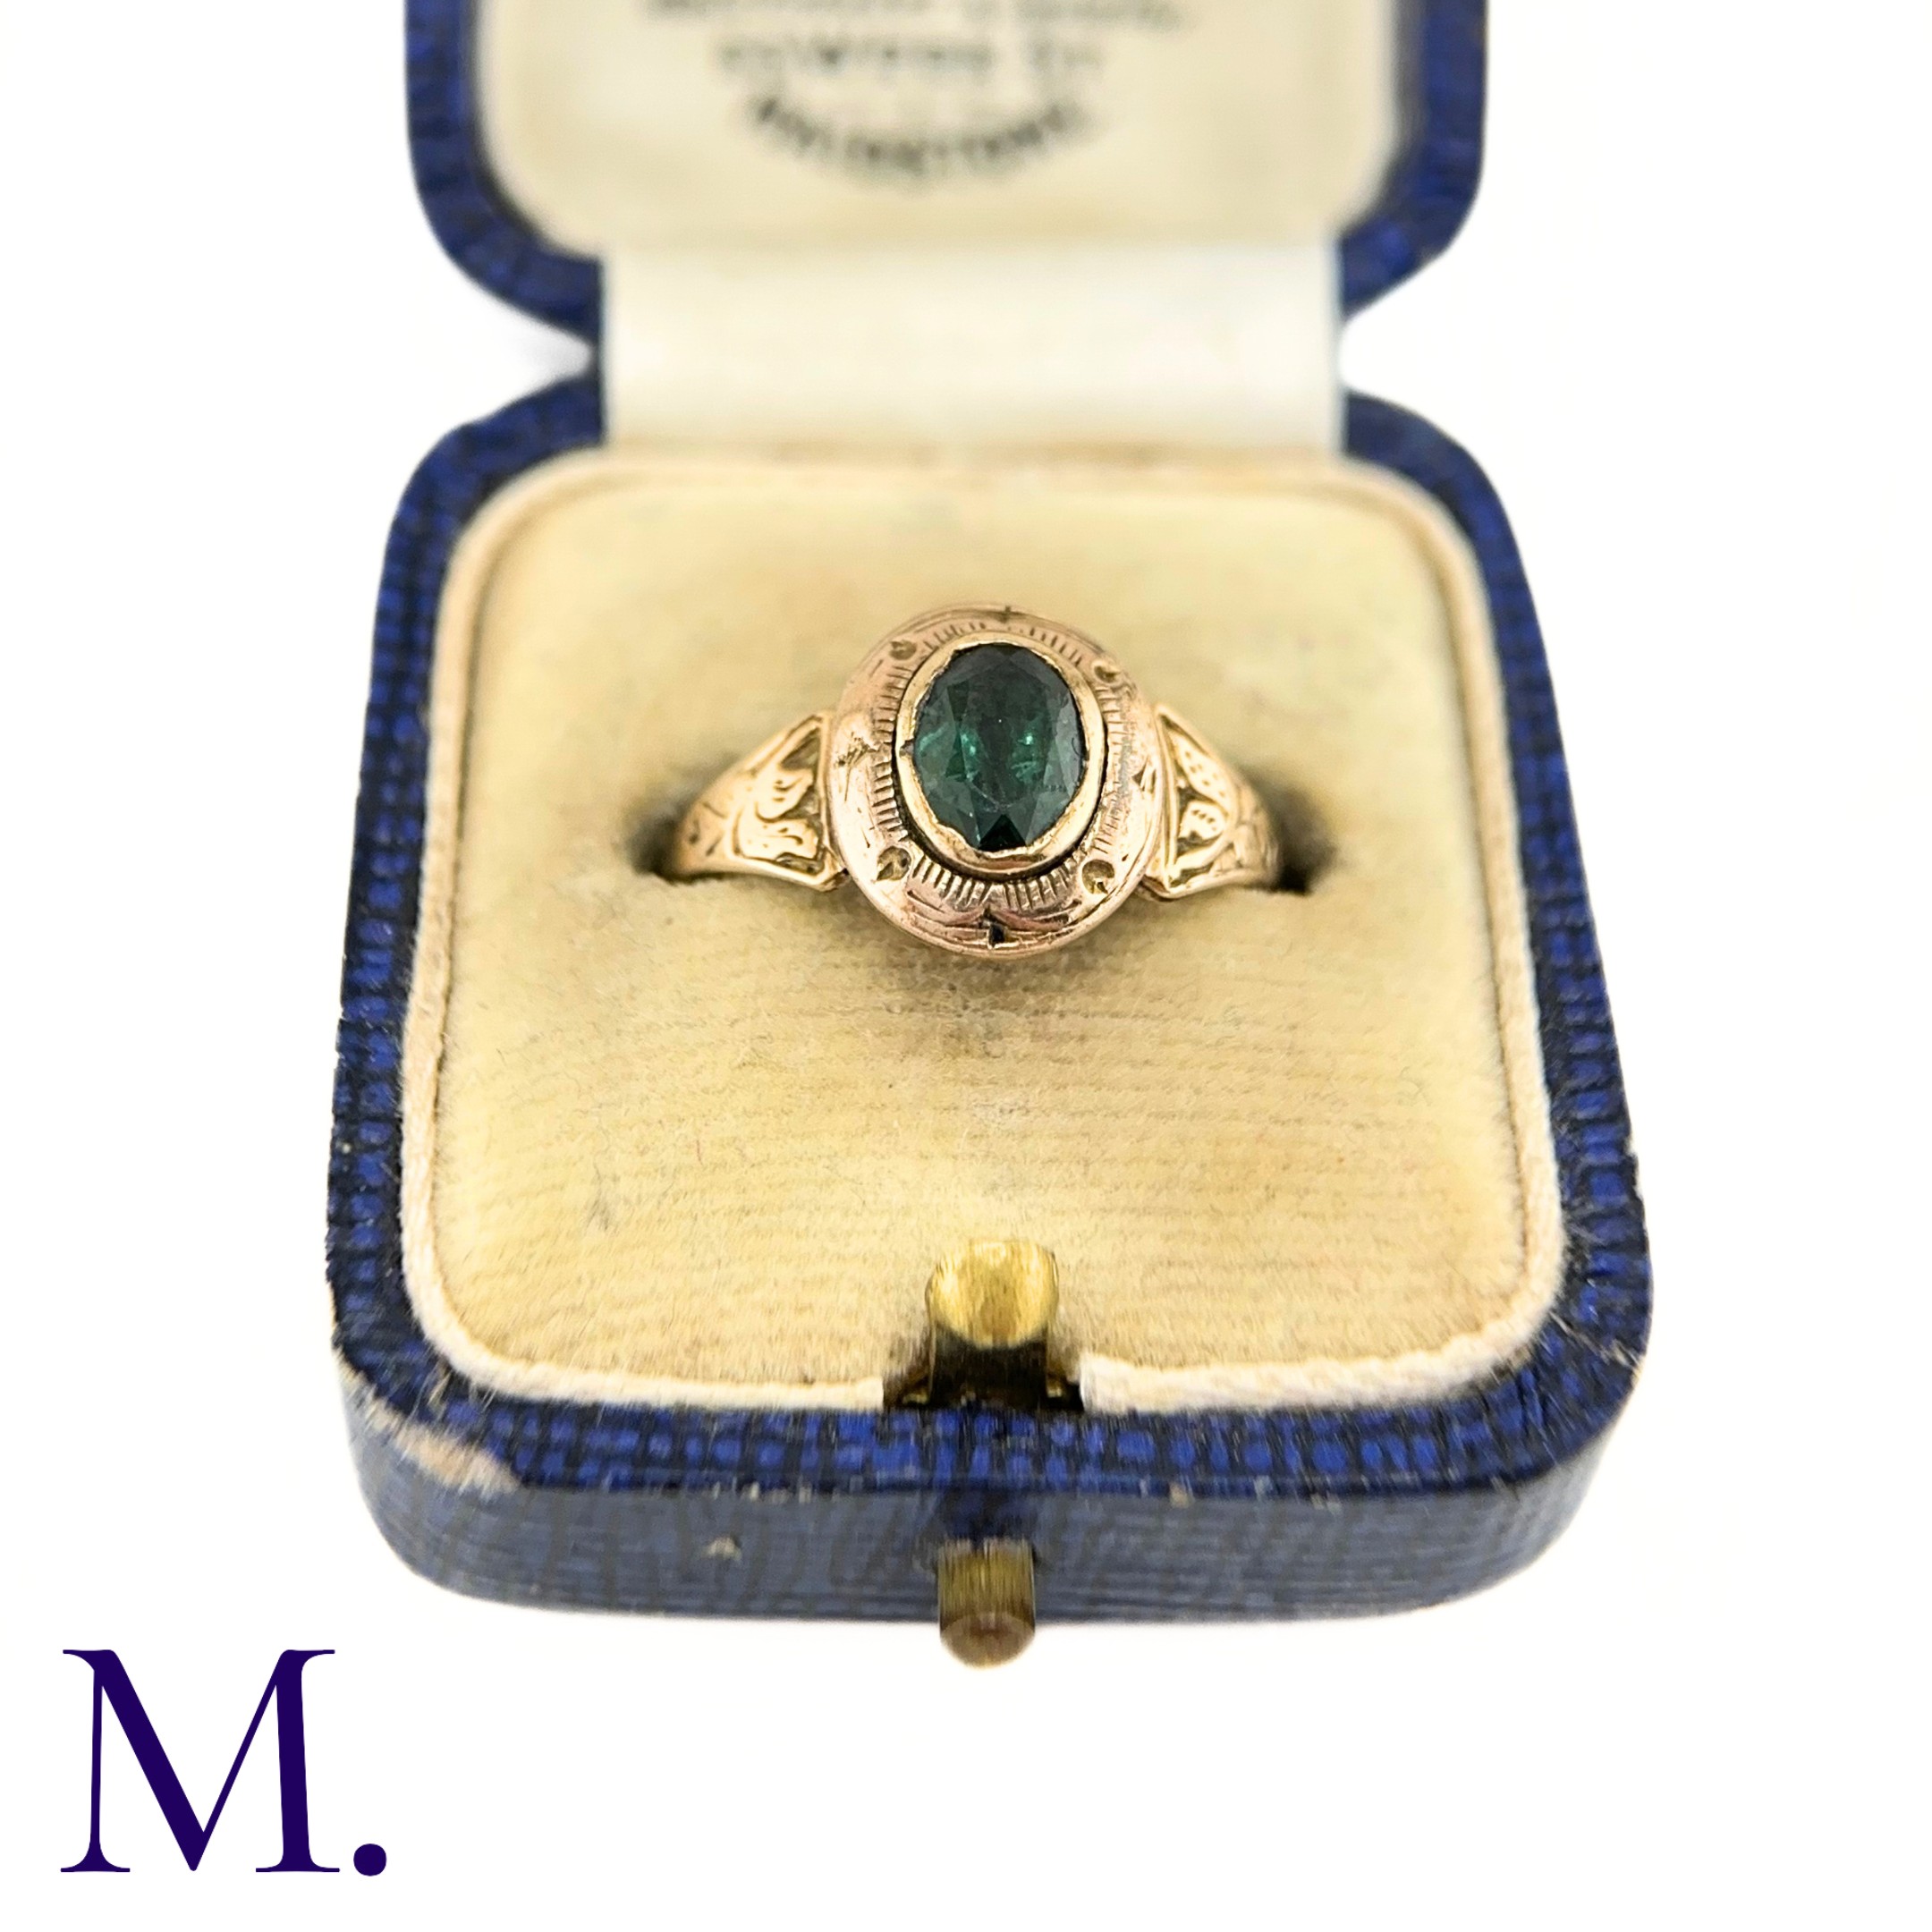 An Antique Green Tourmaline Ring The gold ring is set with an oval green tourmaline and the band and - Image 2 of 6